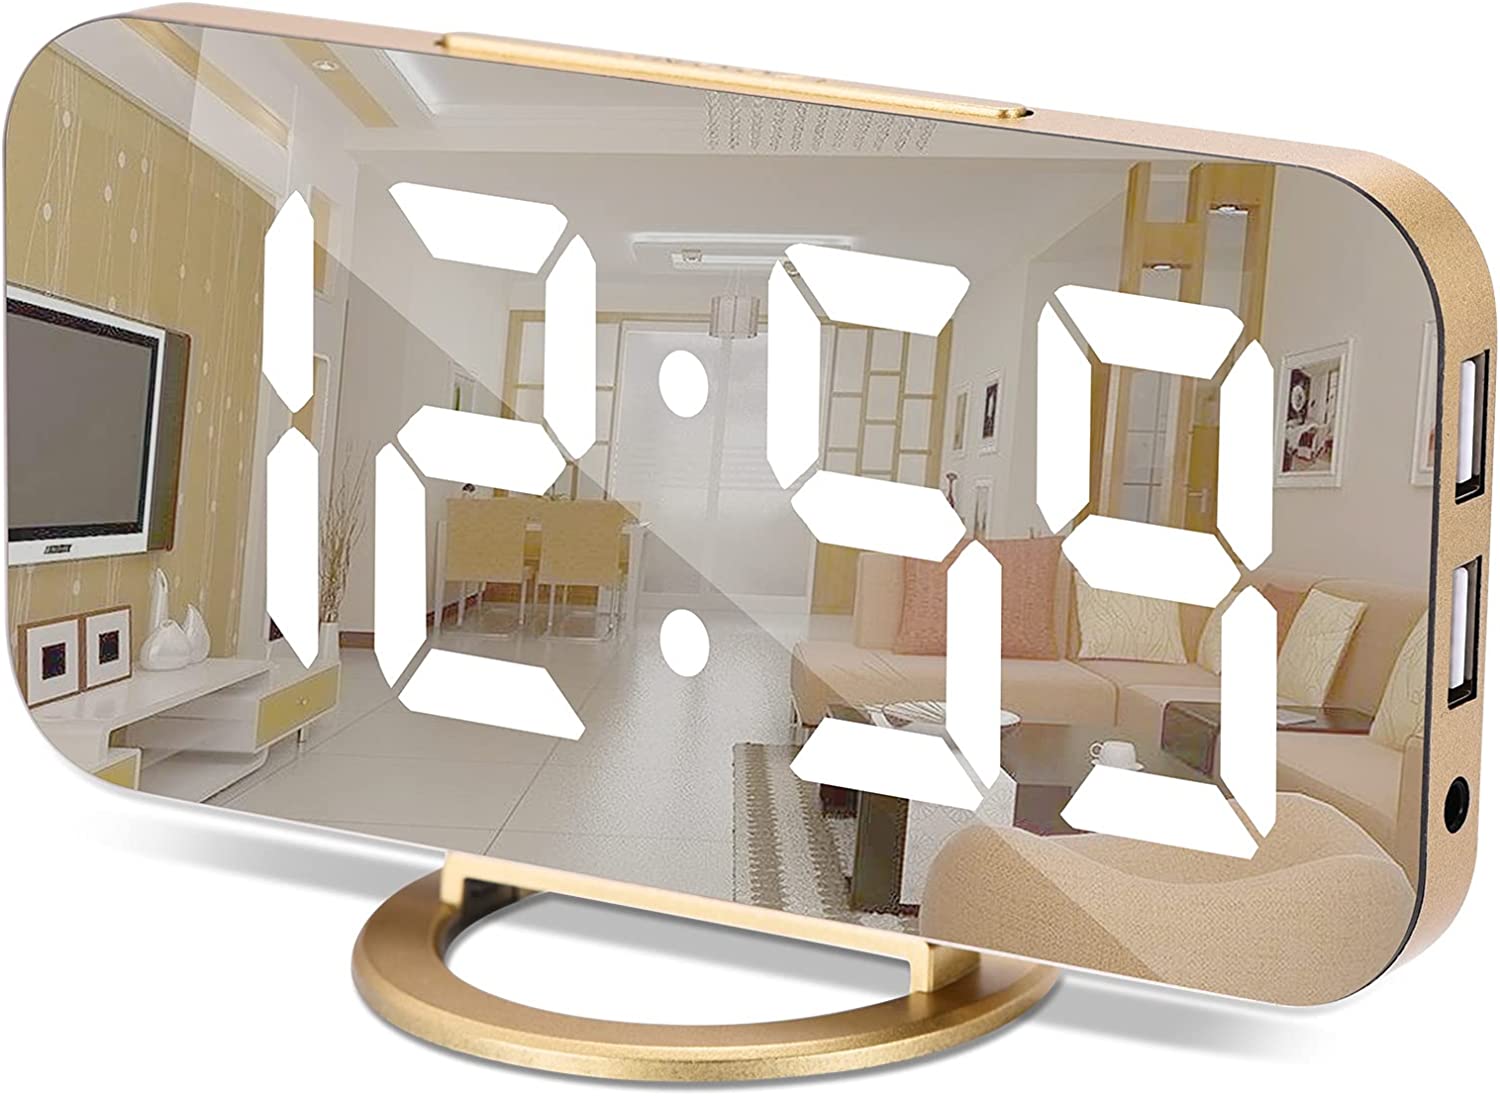 Digital Alarm Clock,6.5 Inch LED Mirror Electronic Clocks,with 2 USB Charging Ports,3 Adjustable Brightness,Snooze,12/24H,for Bedroom Home Office(Gold)